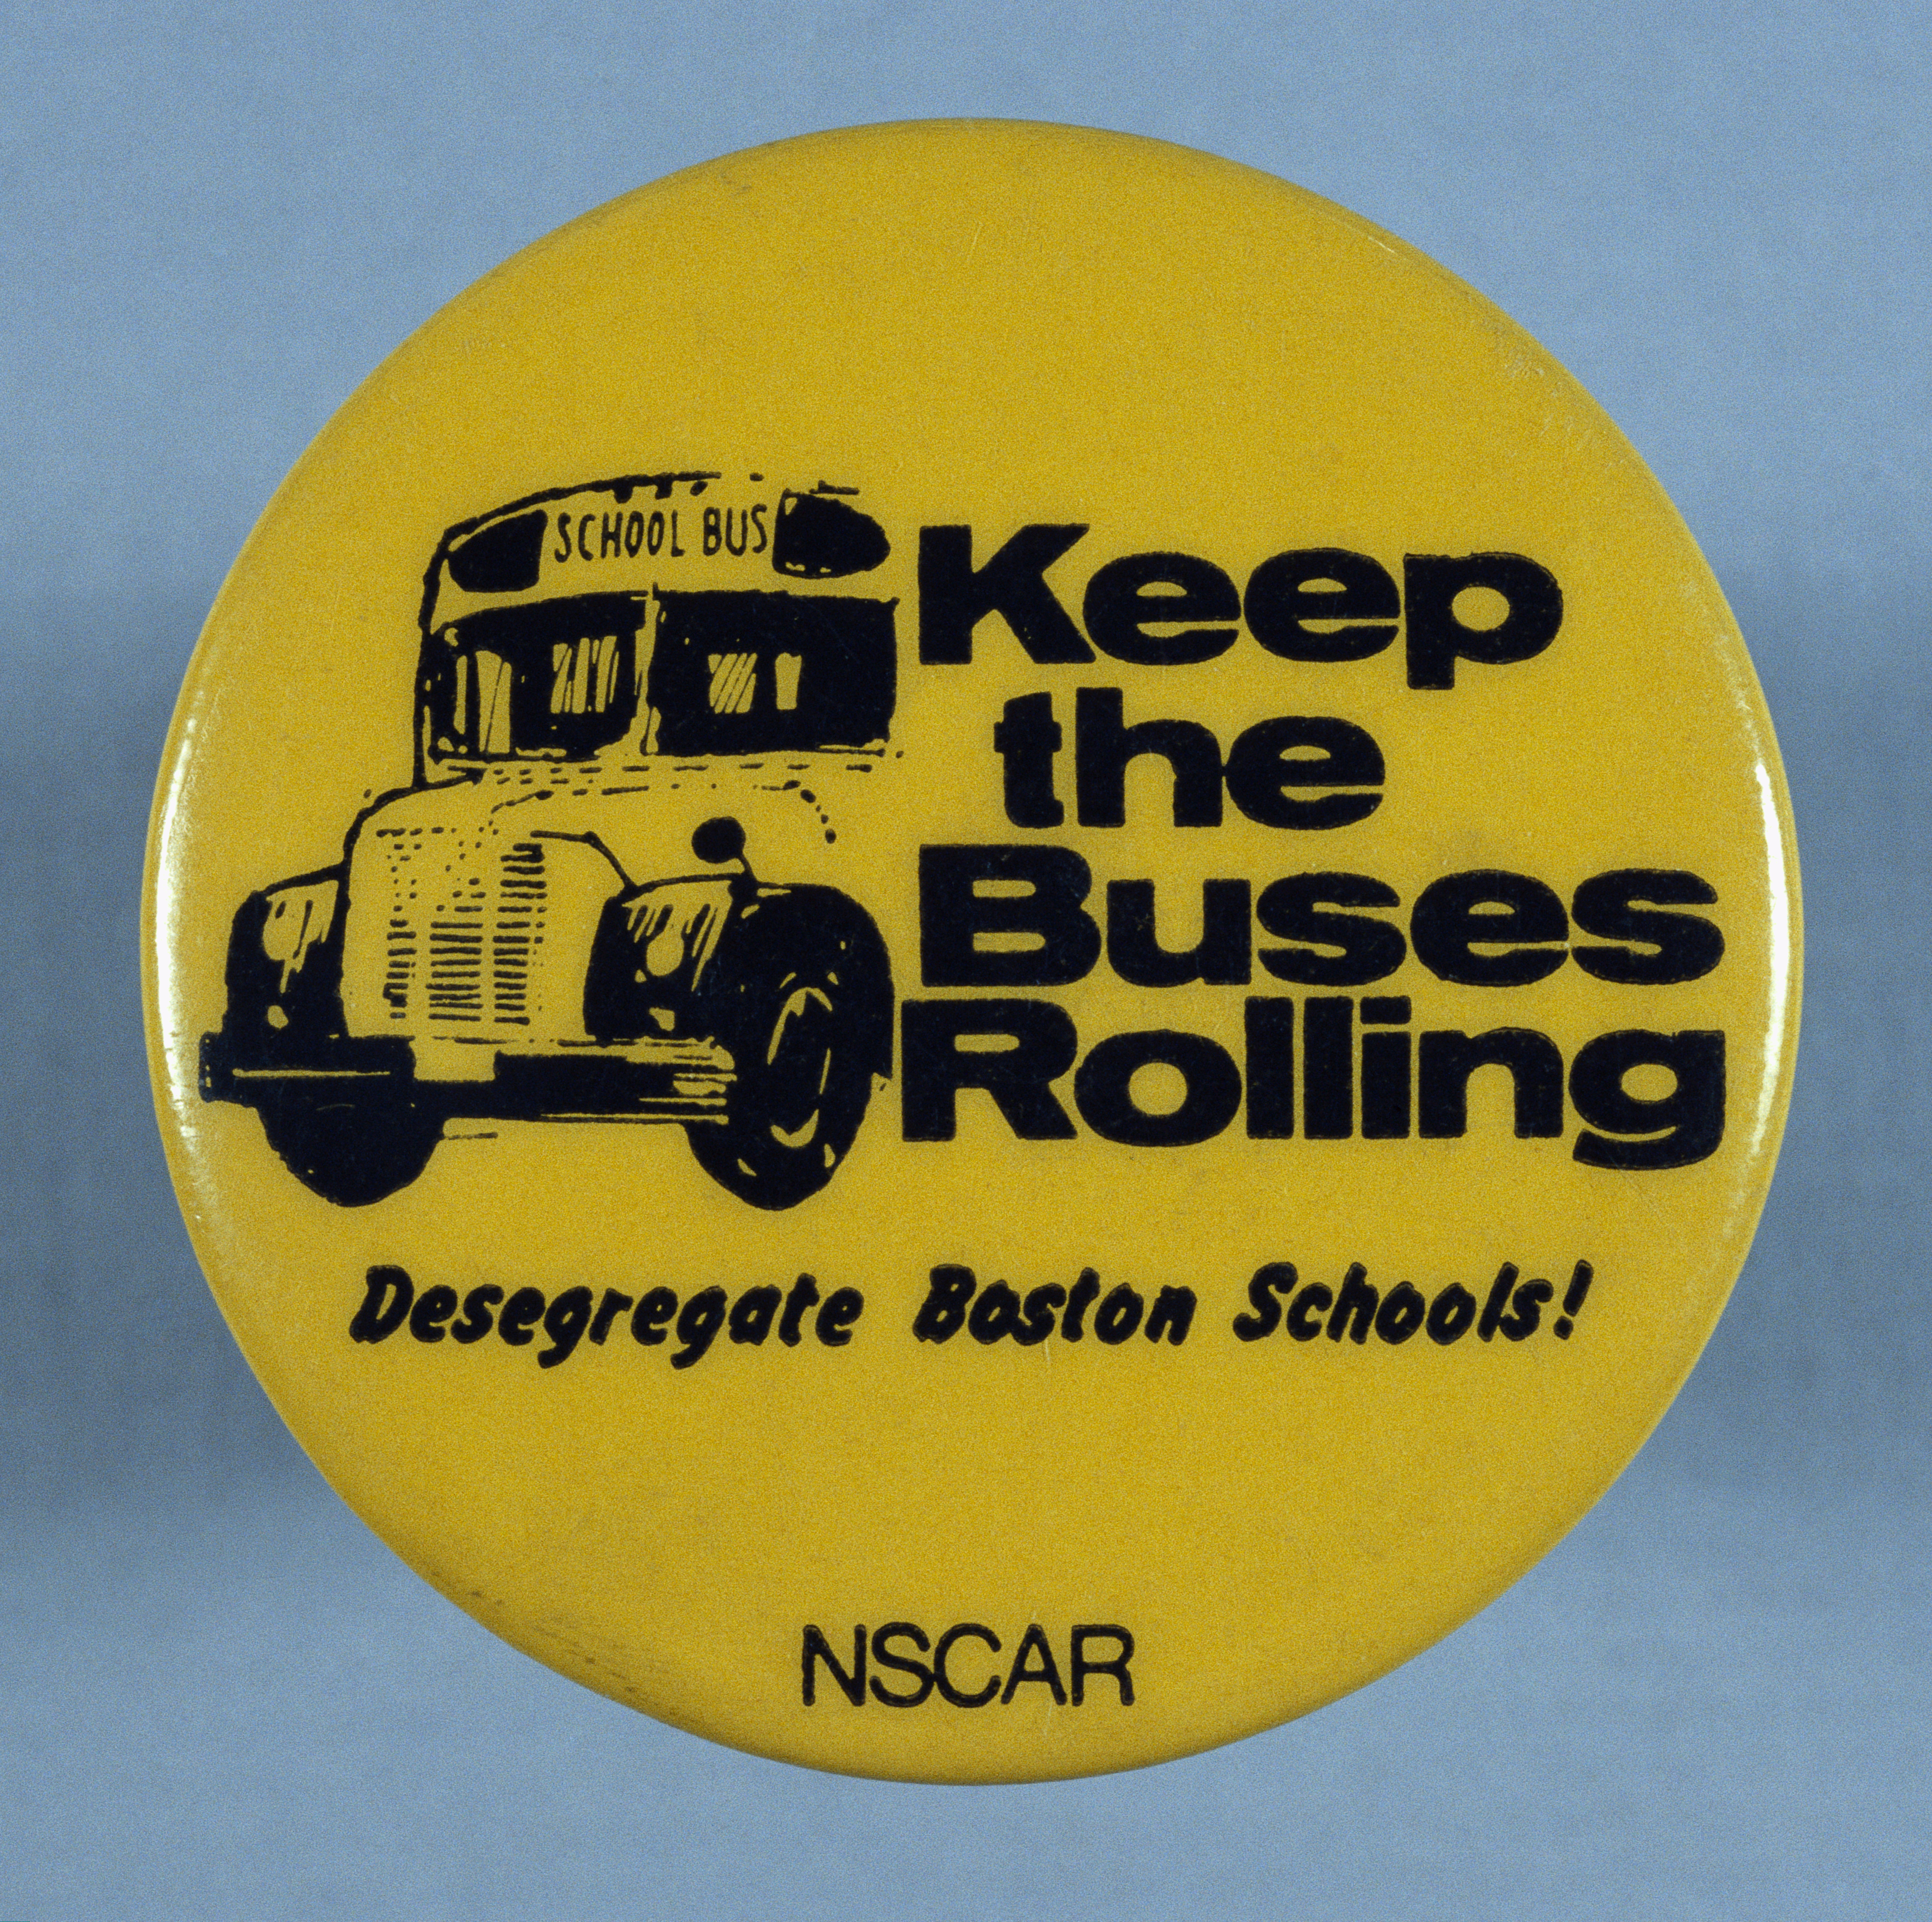 A button in support of desegregating Boston’s schools